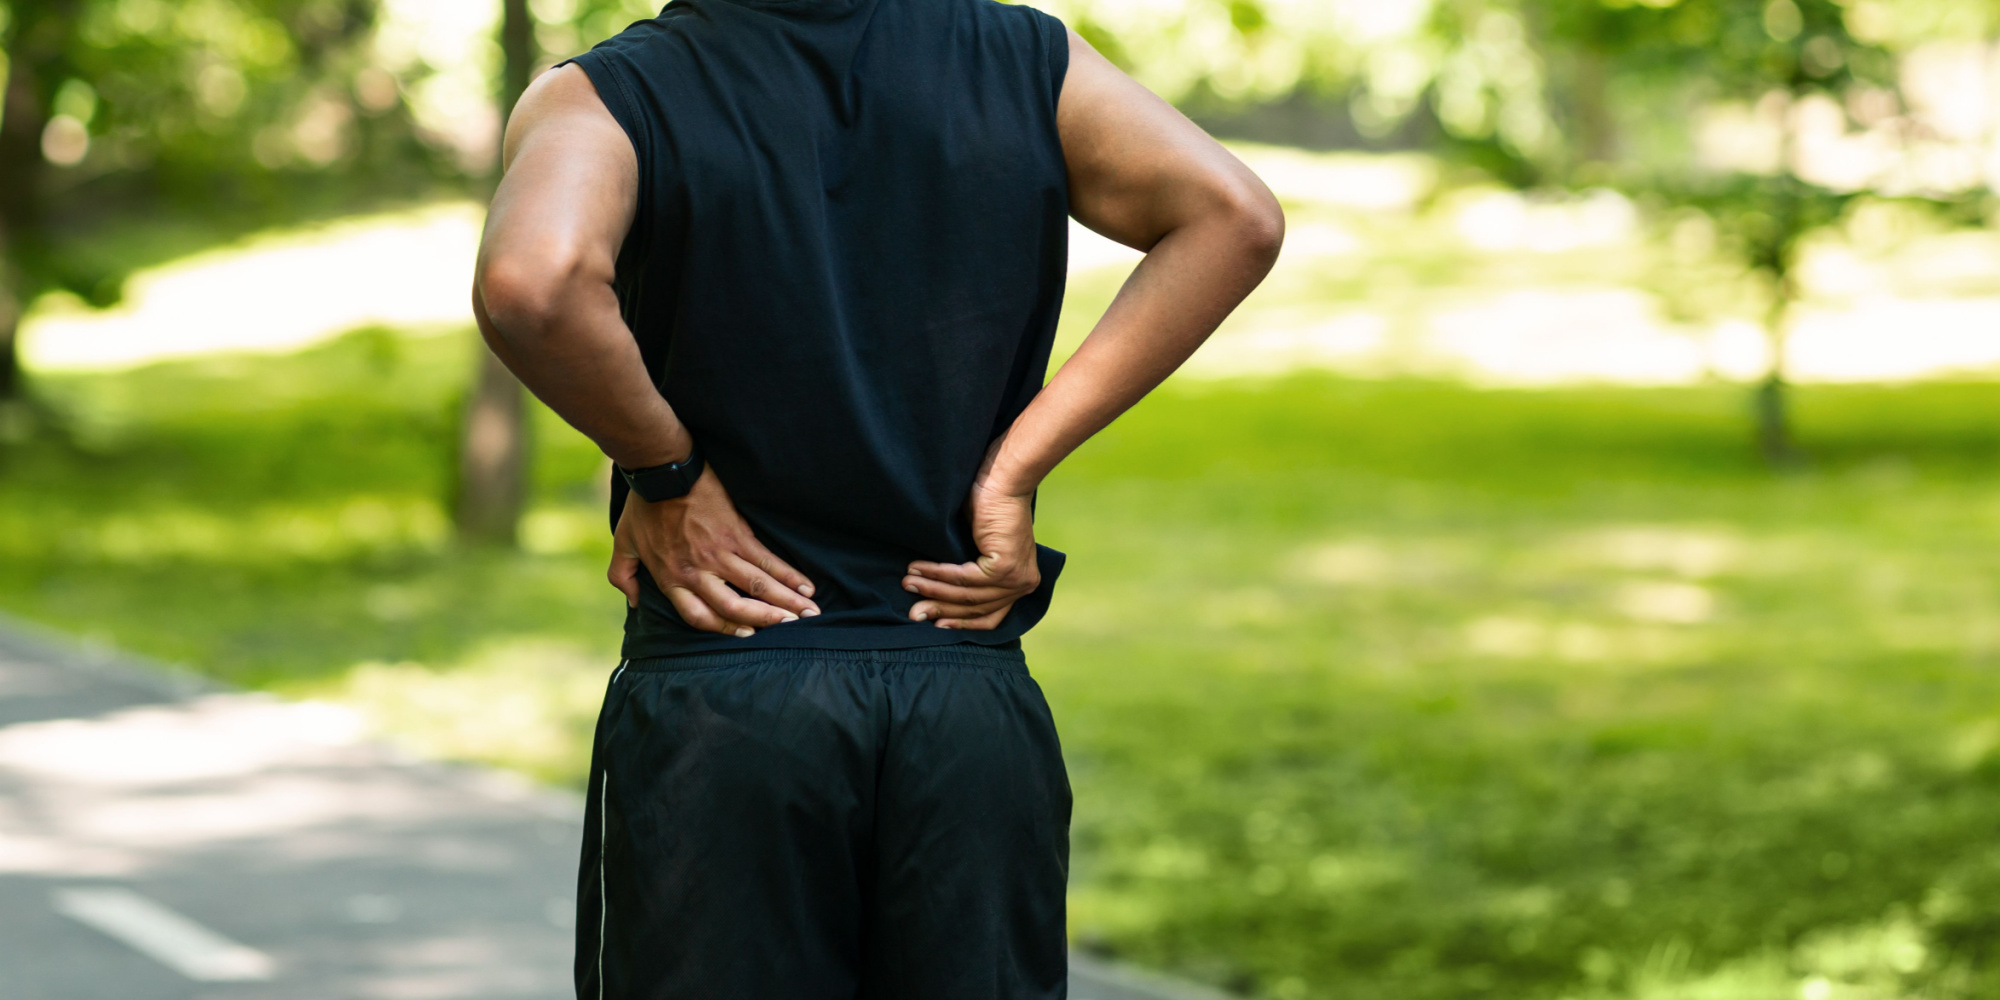 What Are the Most Common Causes of Chronic Back Pain?